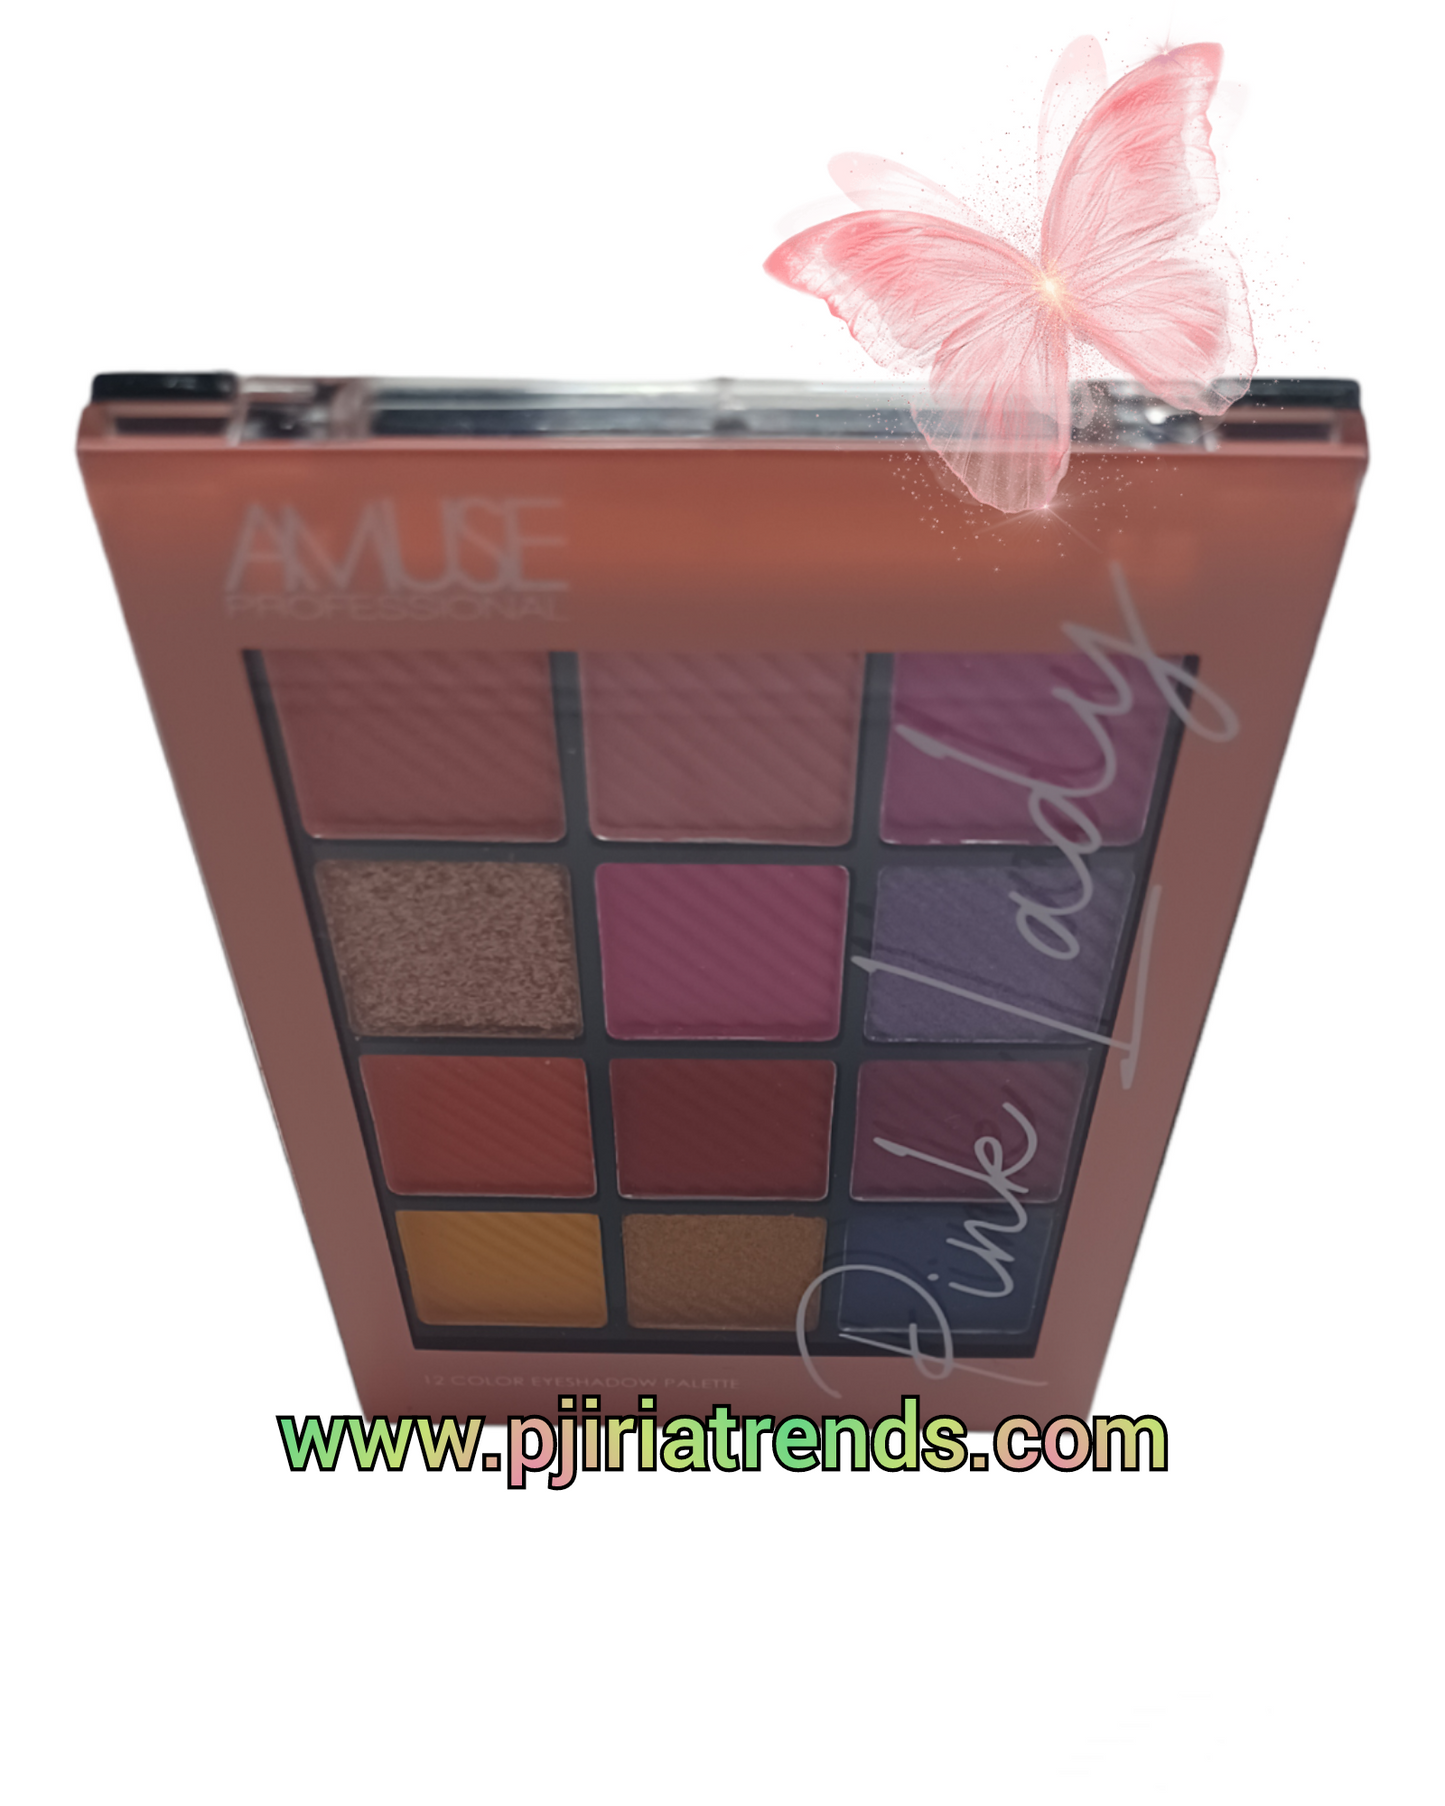 Amuse Professional 12Color Eyeshadow Palette